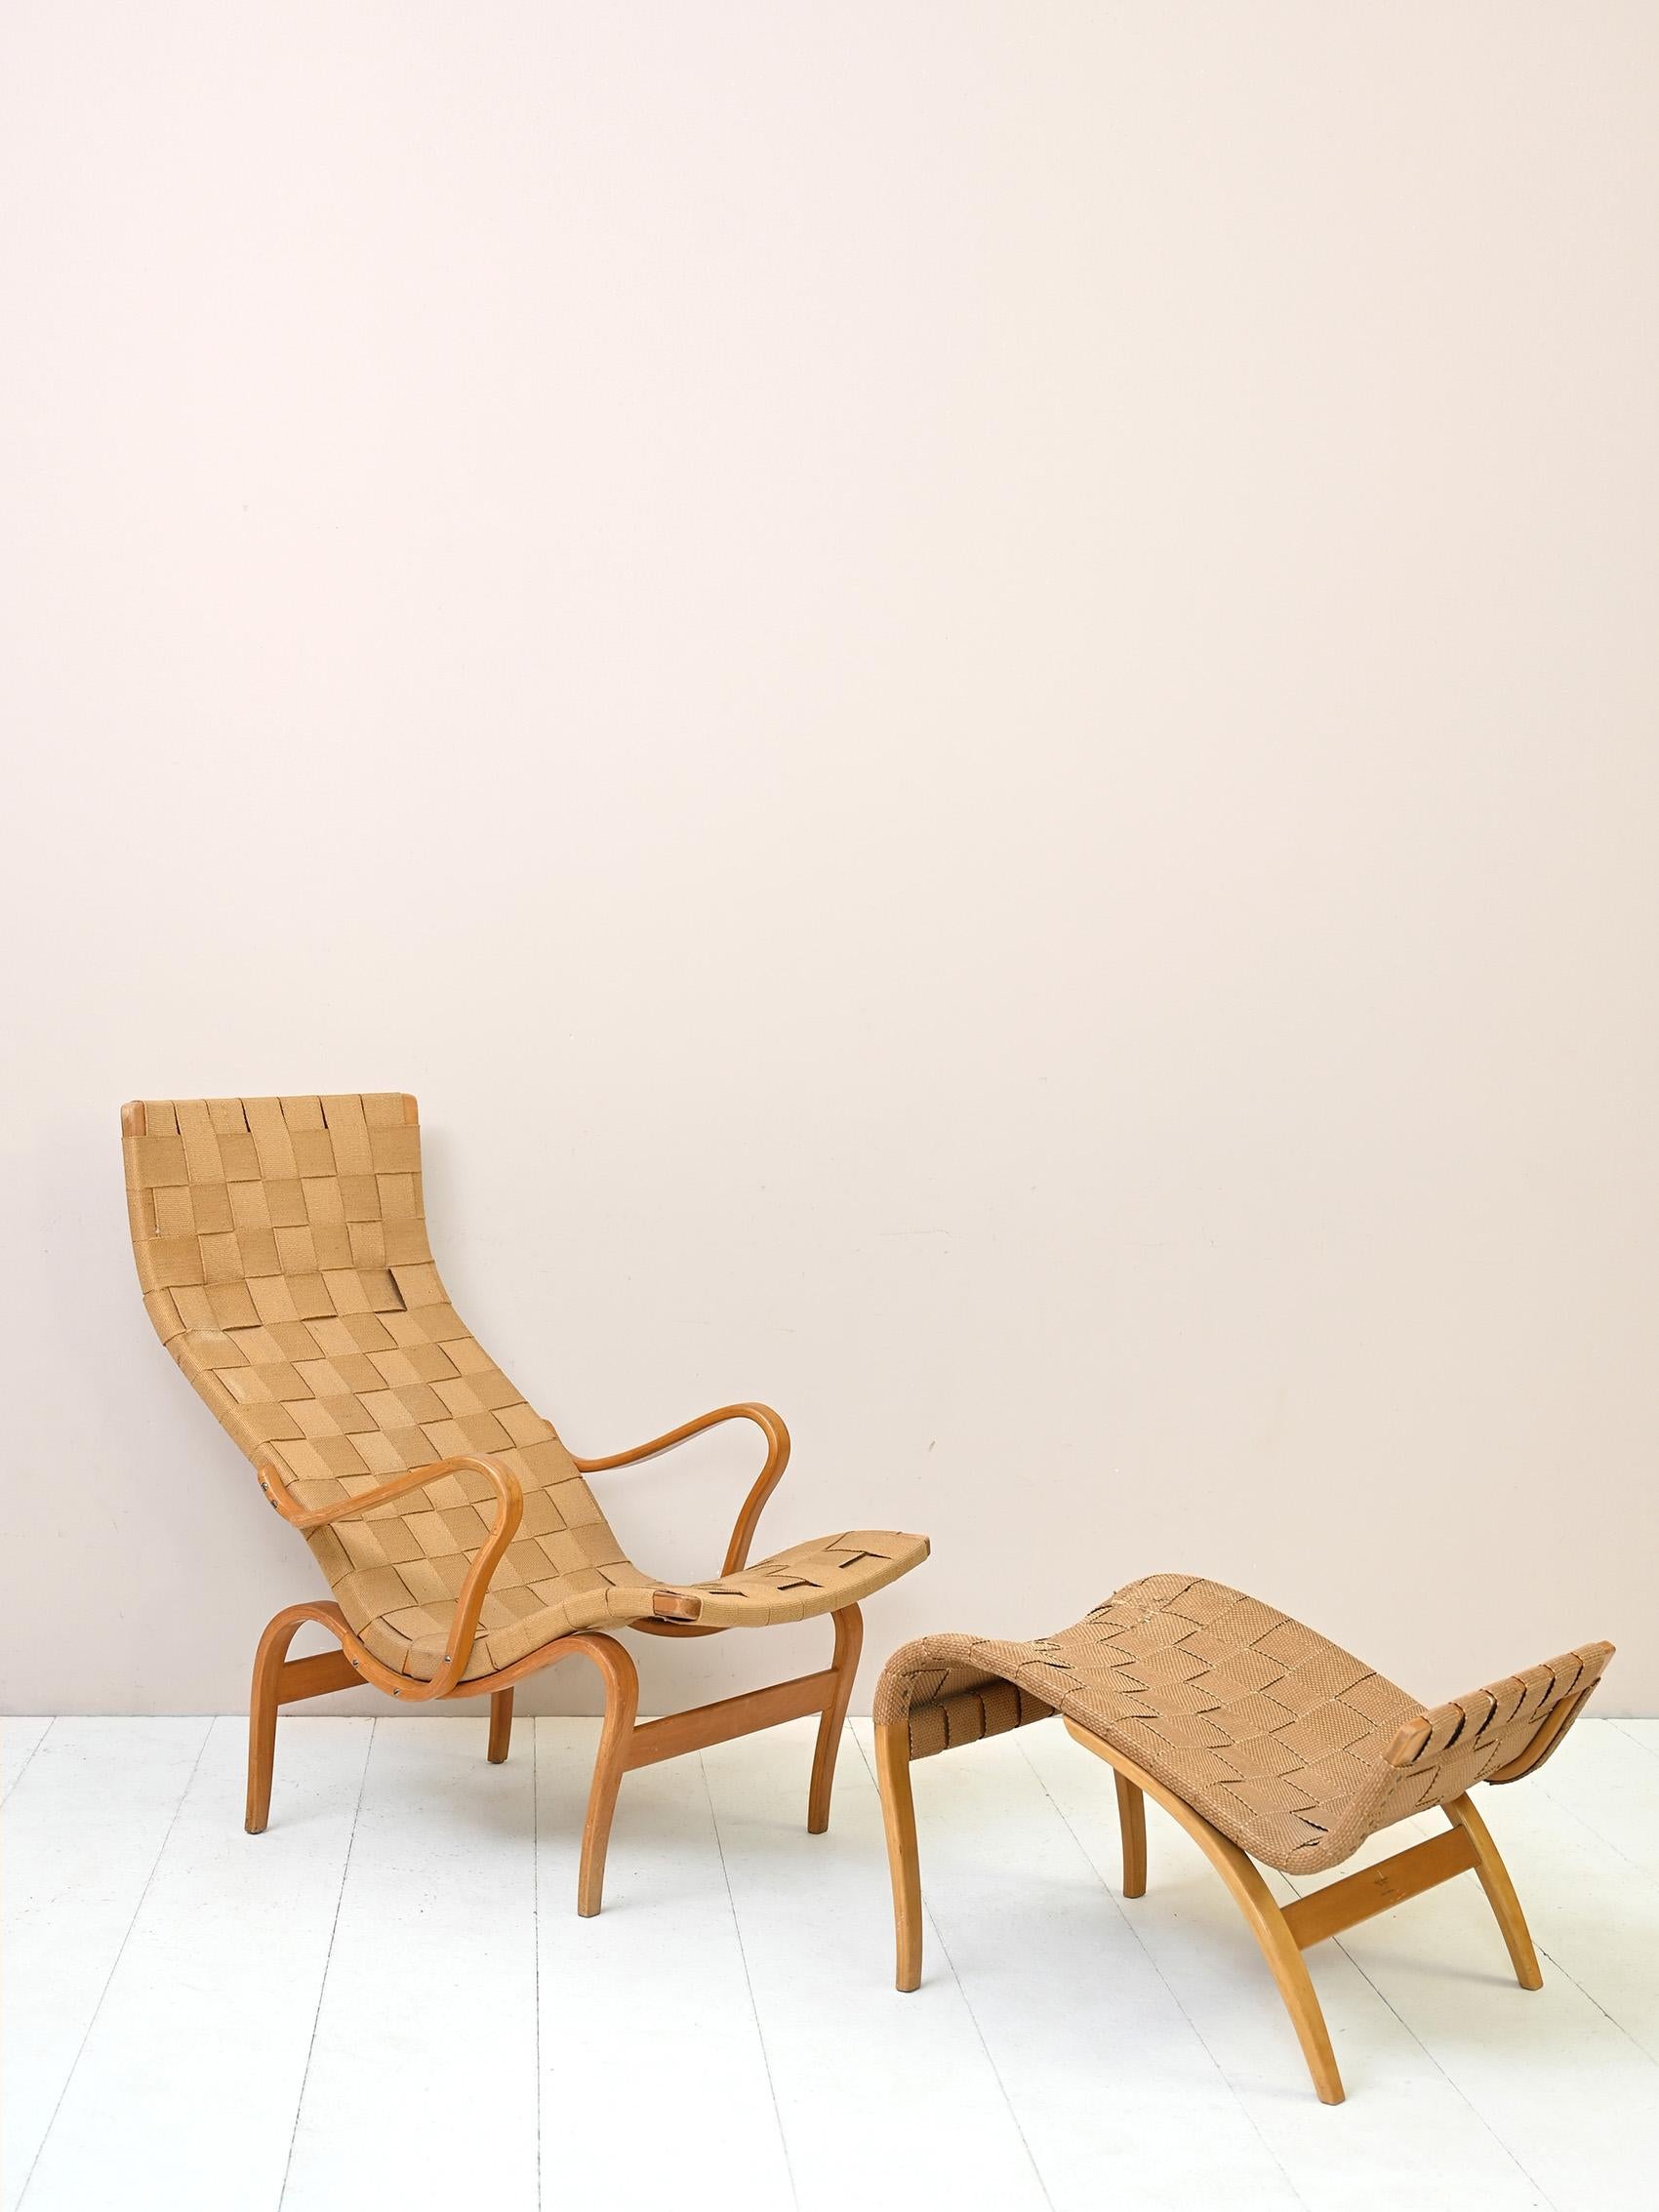 Iconic 'Pernilla' armchair and footstool designed by Bruno Mathsson for Karl Mathsson AB in Värnamo, Sweden in the 1940s.

The frame is made of birch wood and the seat of canvas with crossed straps.

Good condition. The color of the canvas of